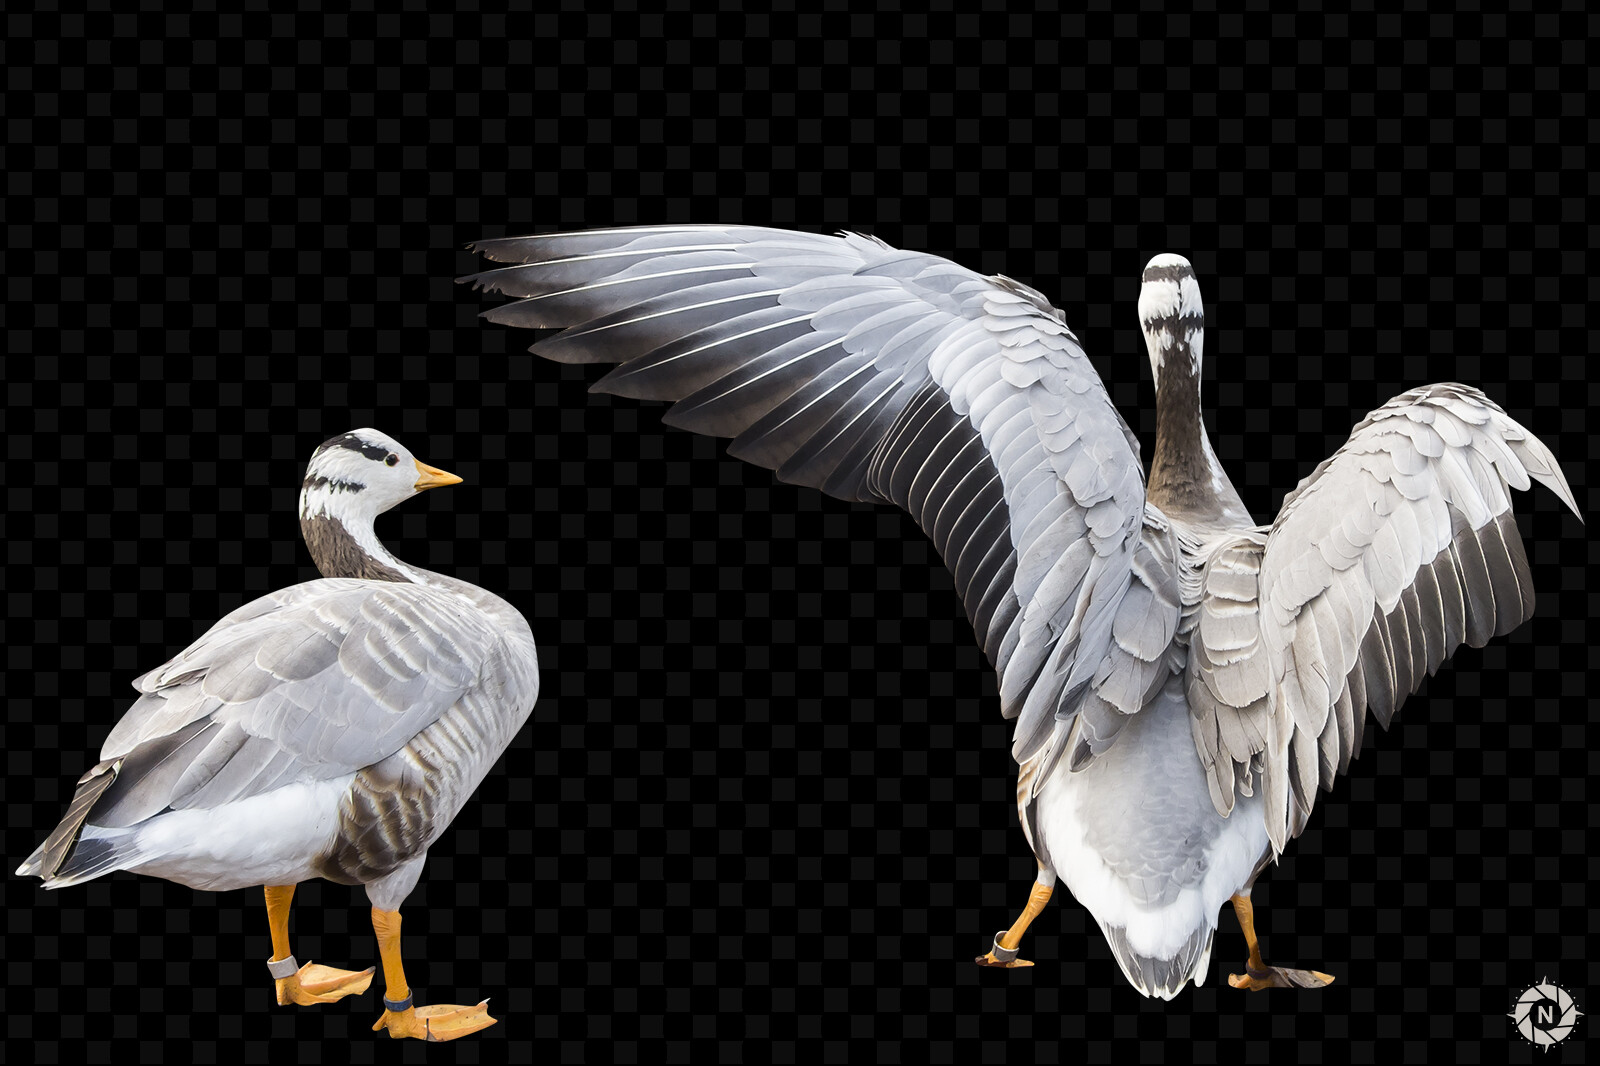 From the PNG Photo Pack: Birds

https://www.artstation.com/a/165854